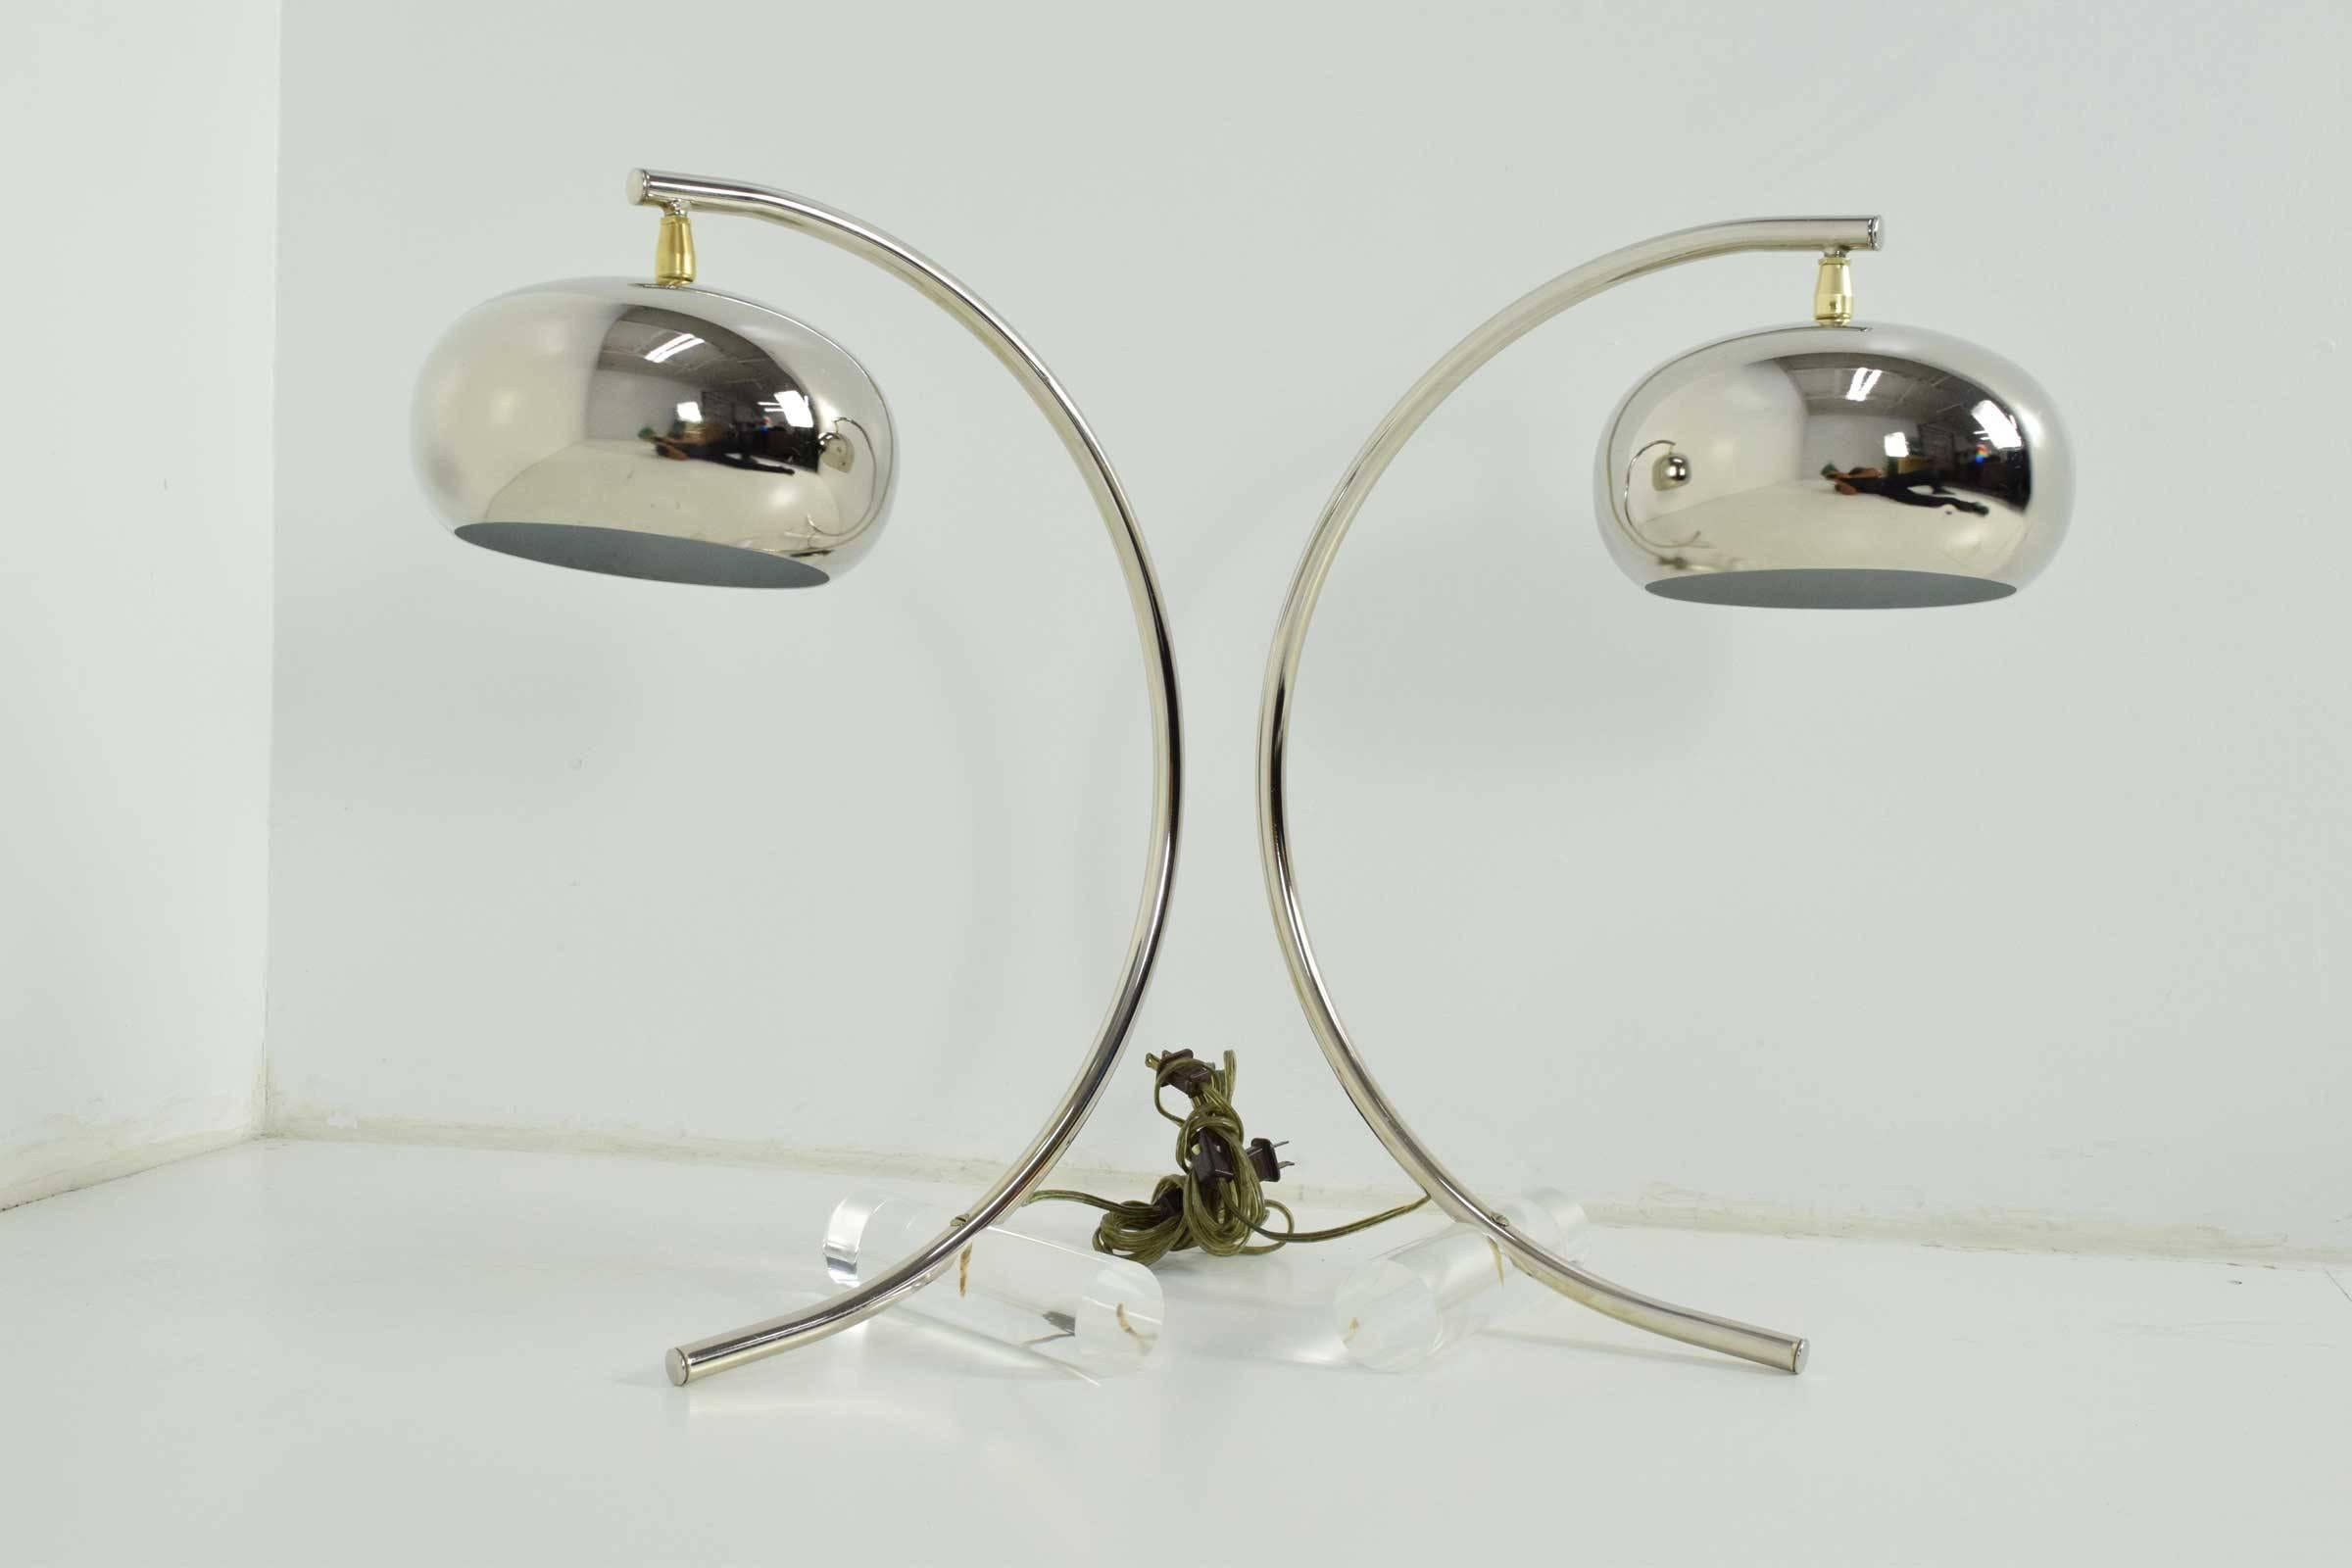 A unique pair of table lamps with nickel finish and Lucite base.